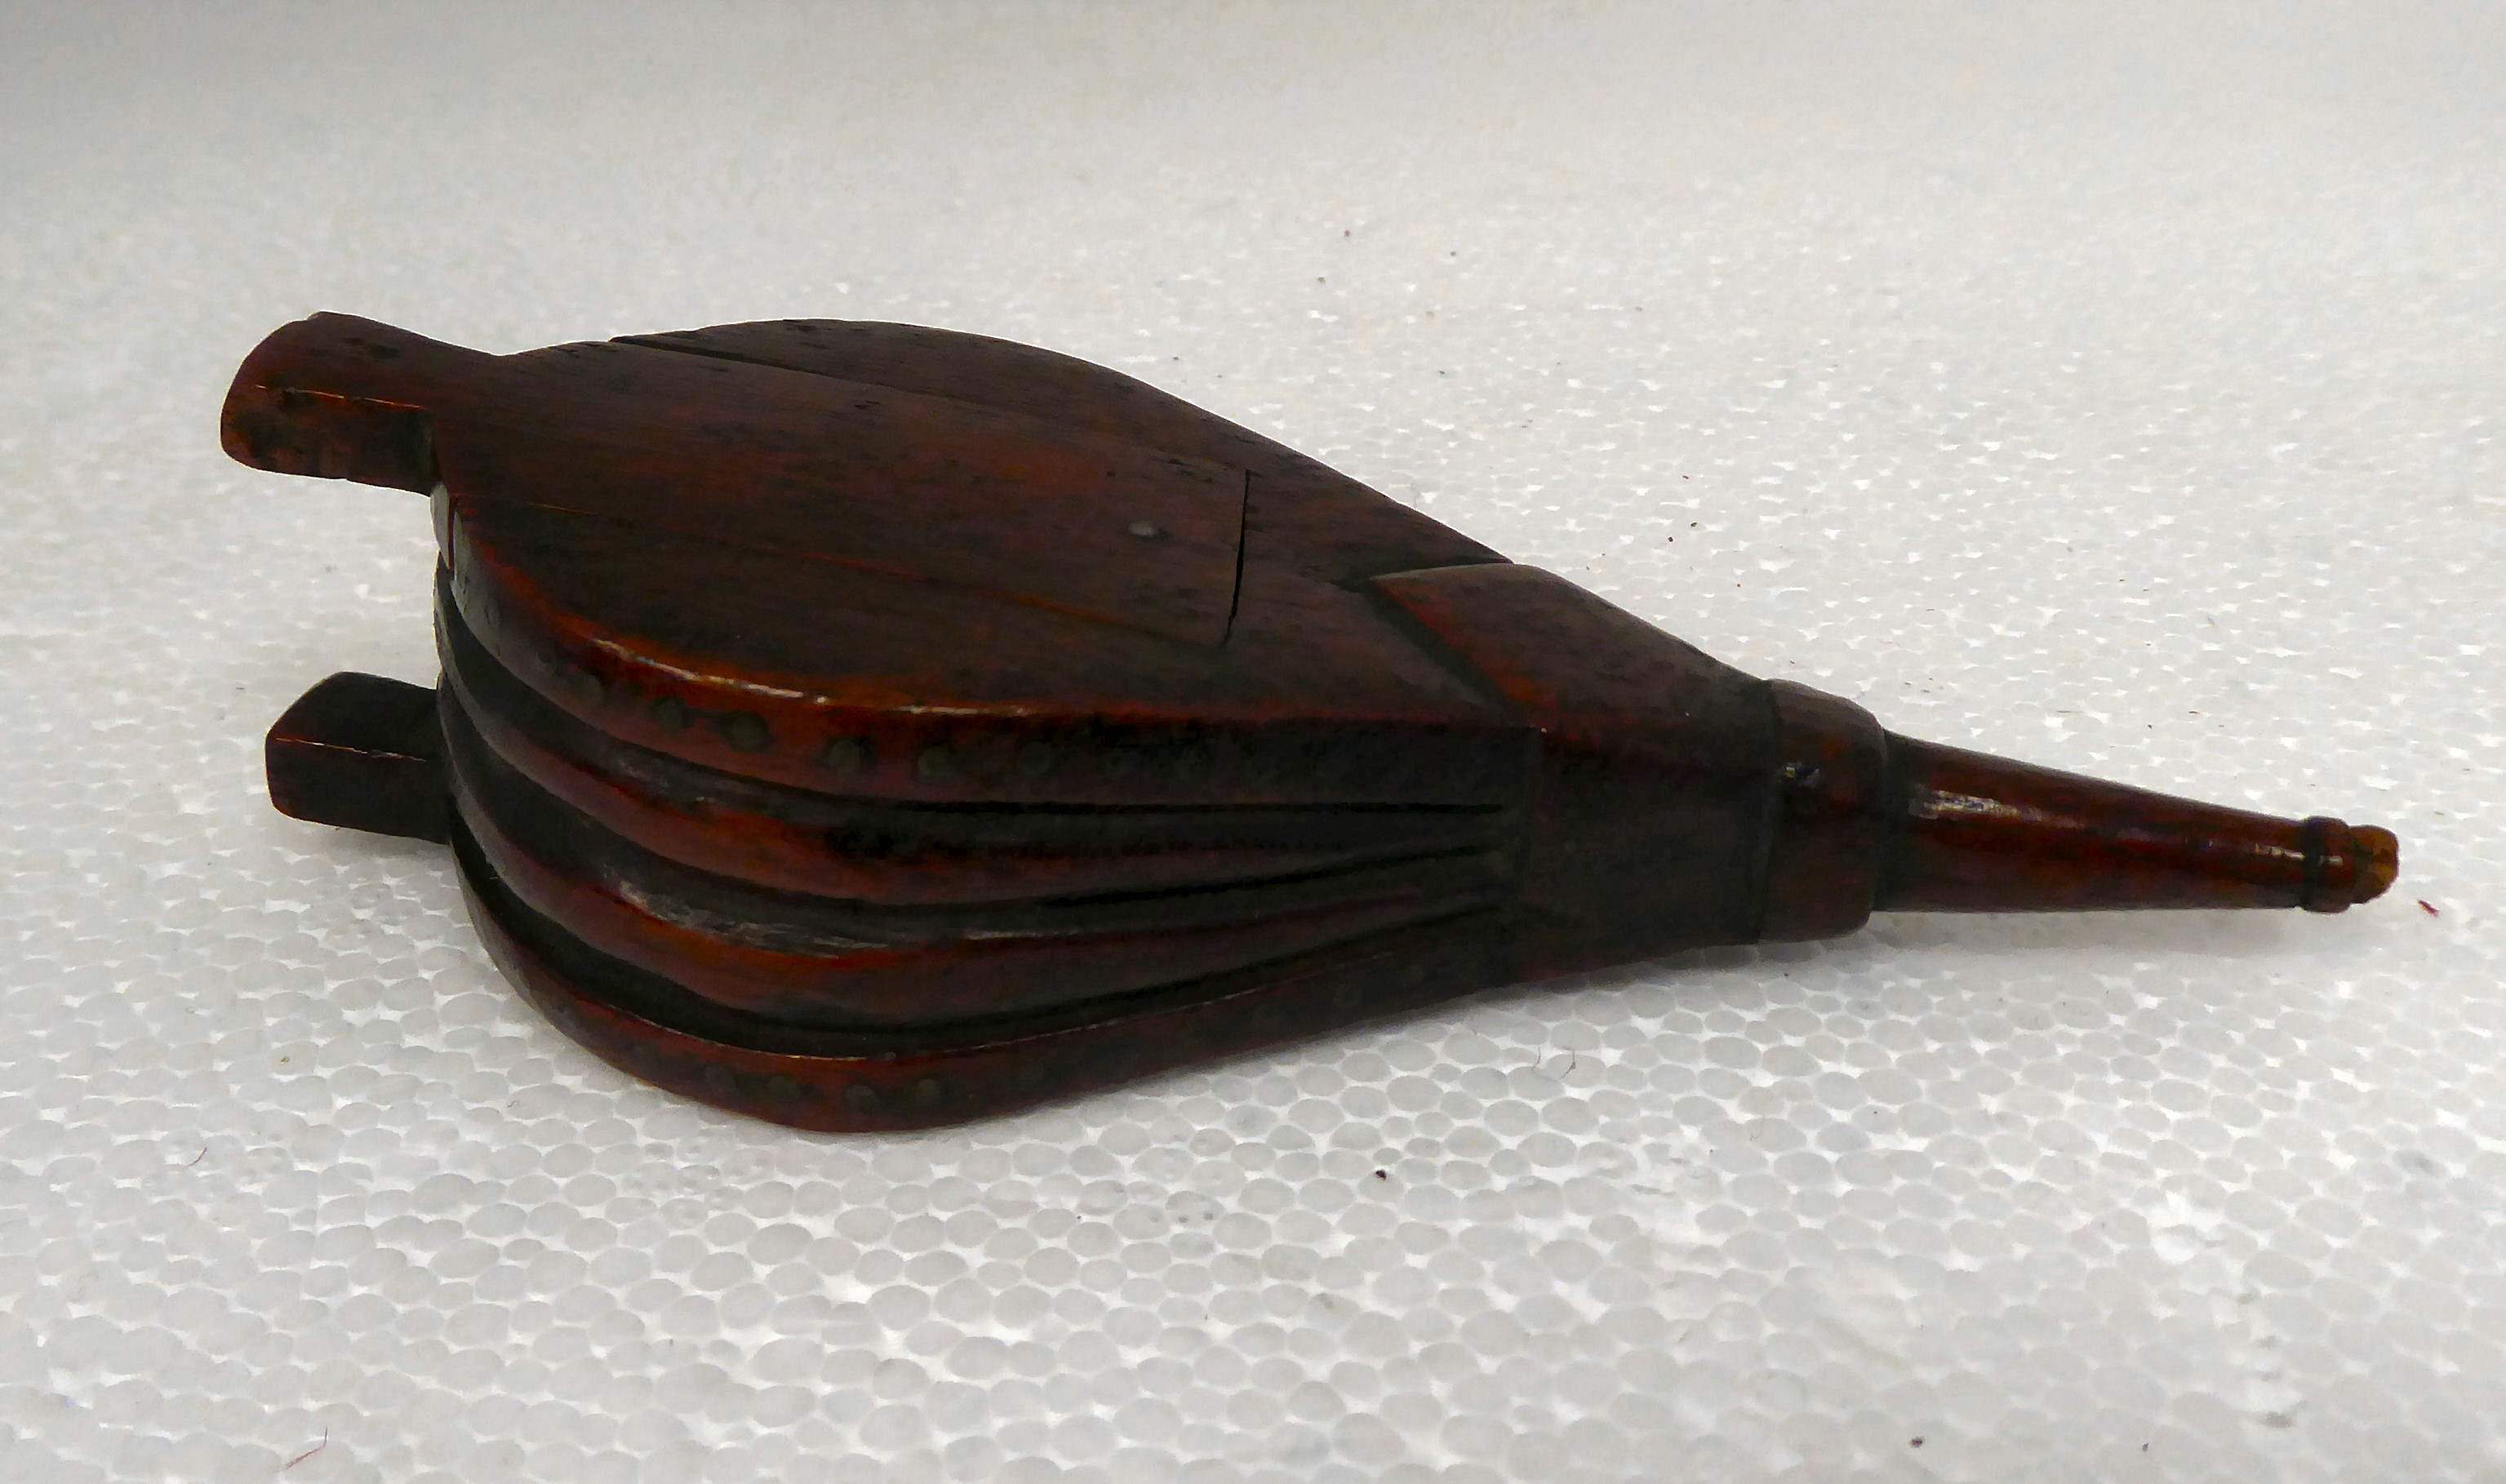 A 19thC treen carved wooden novelty snuff box, fashioned as a pair of bellows with a sliding lid